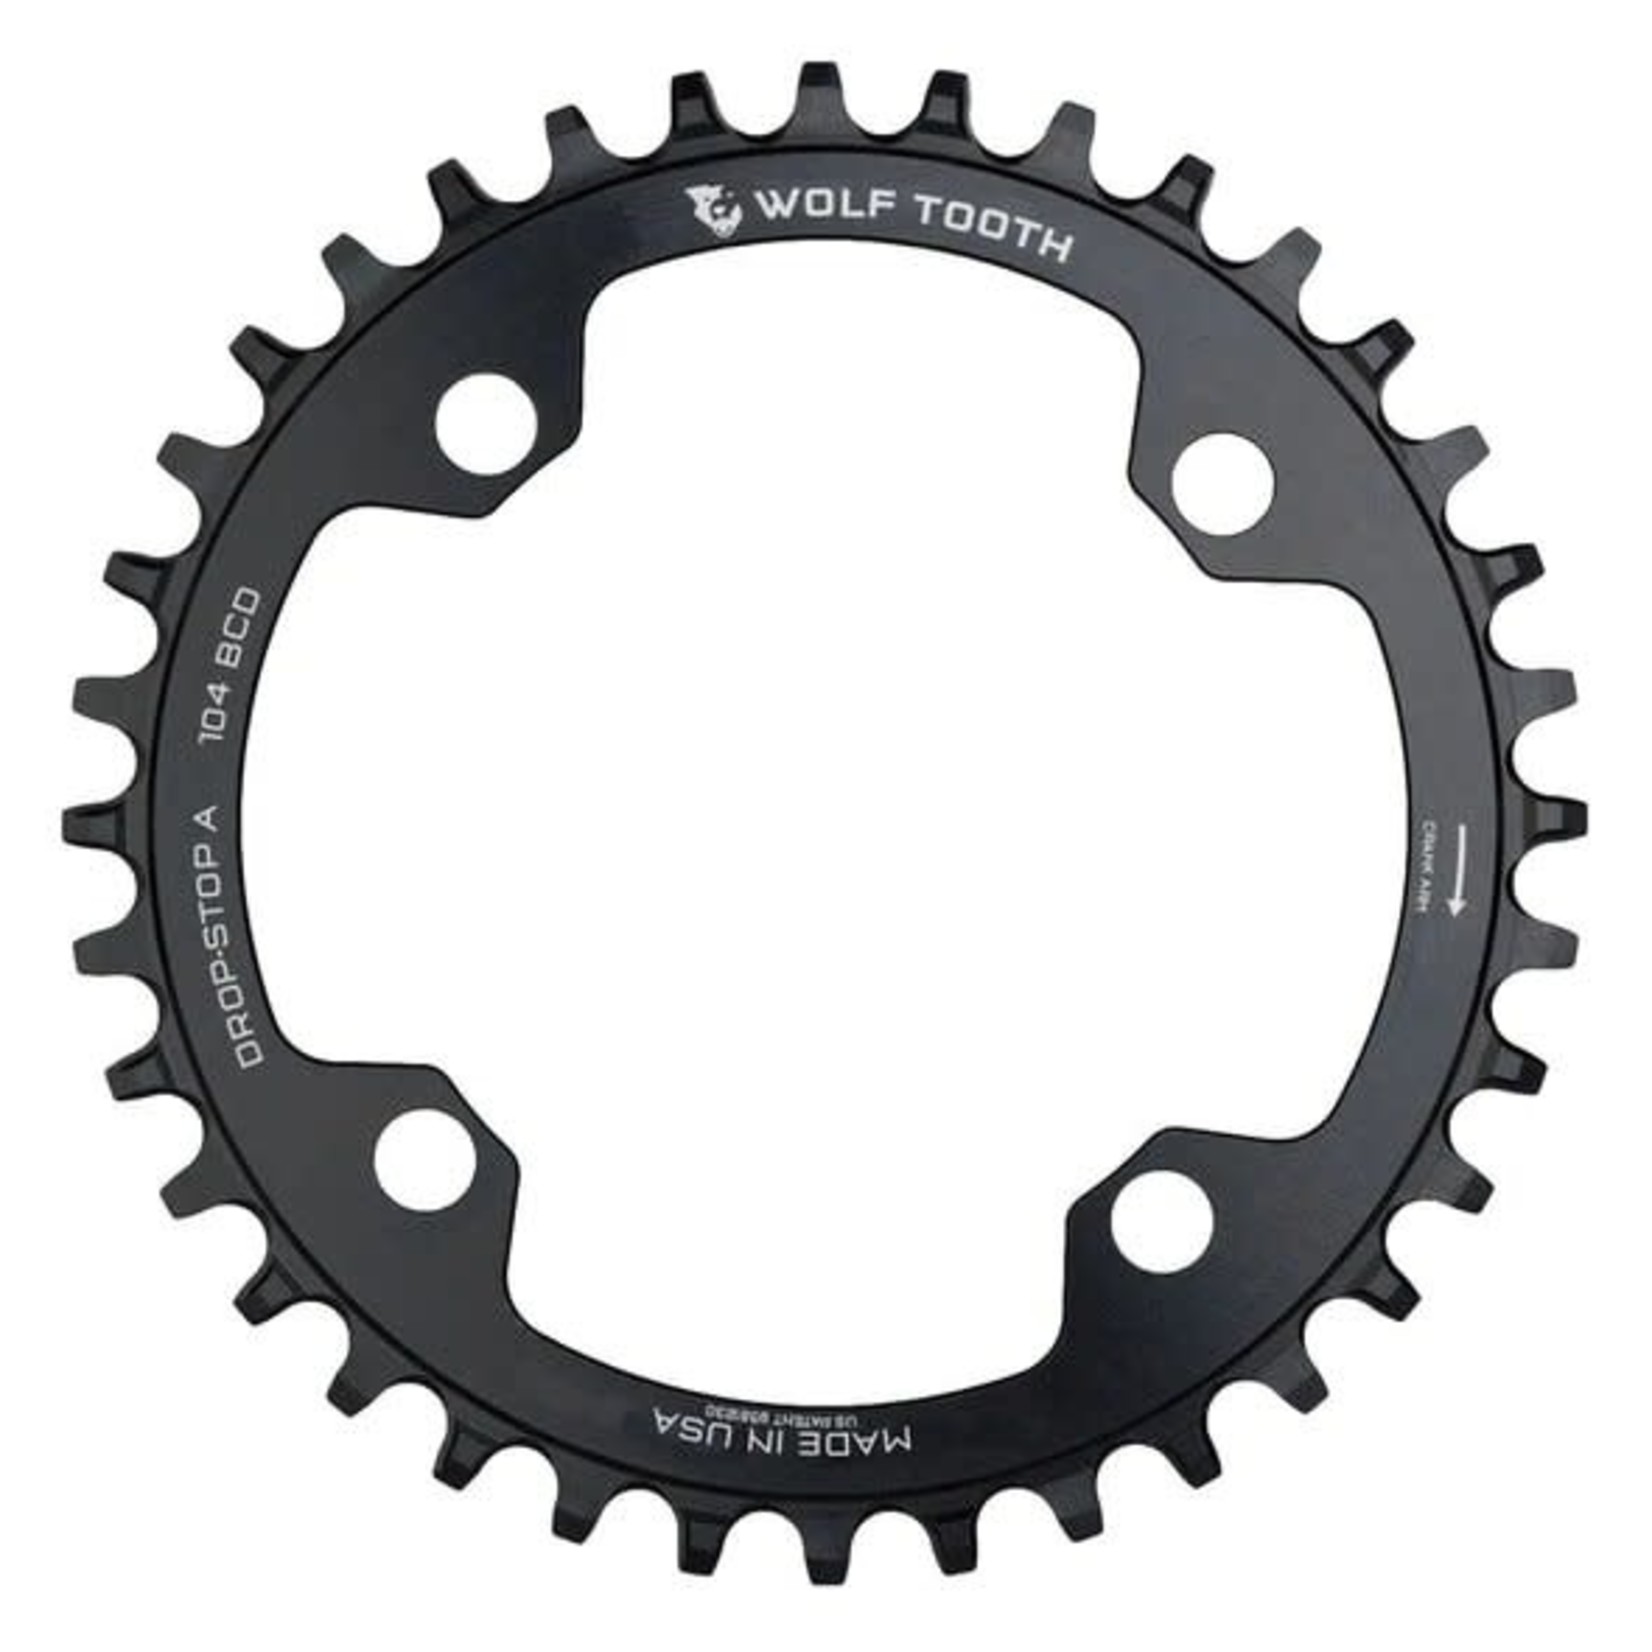 Wolf Tooth Components Wolf Tooth 104 BCD Chainrings - 104 x 38T